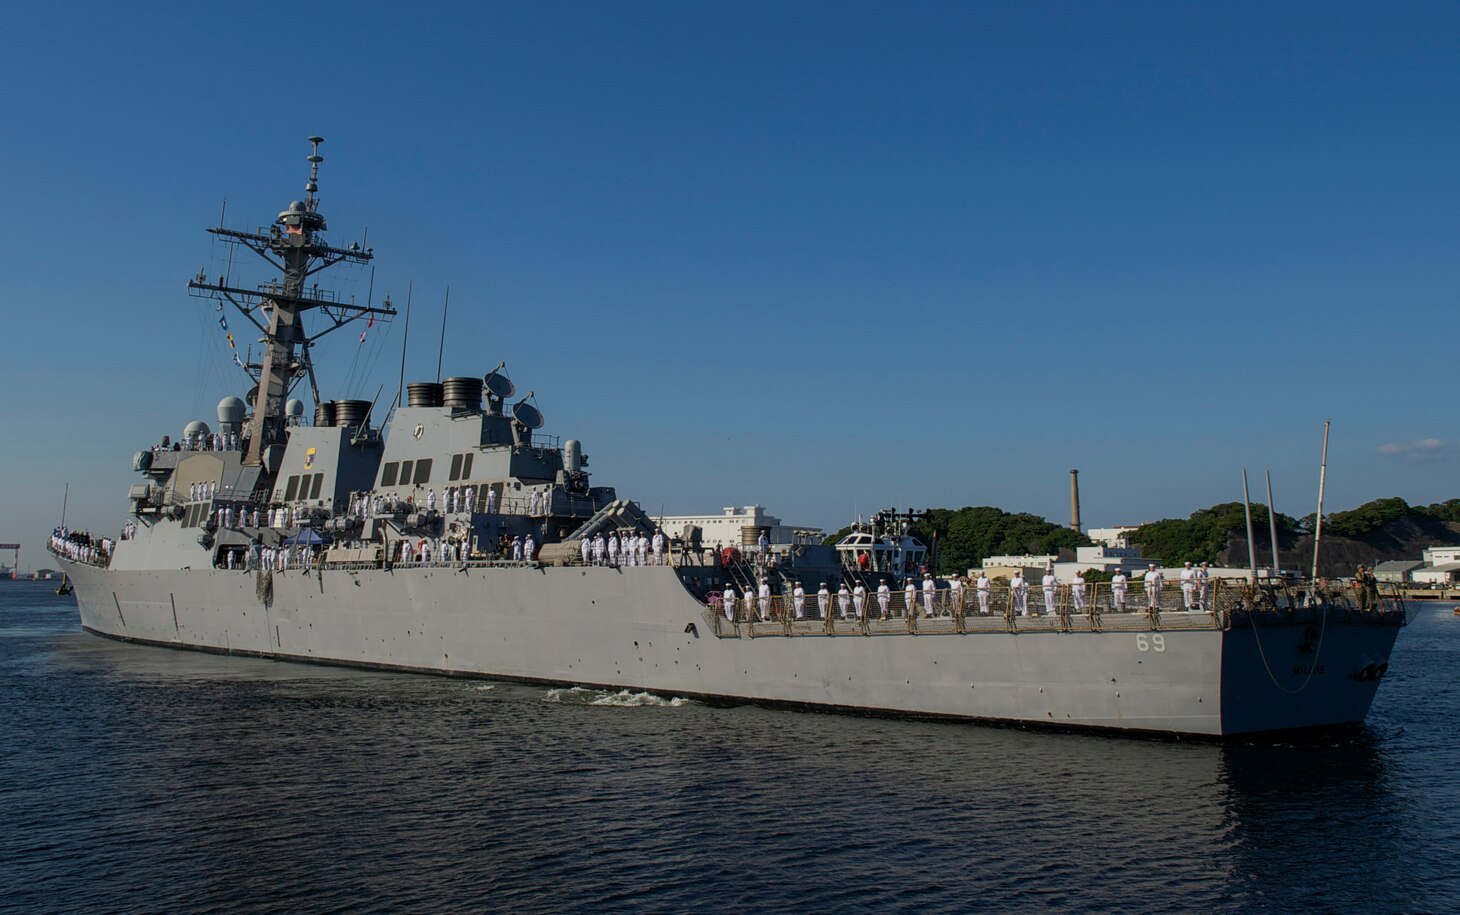 The Arleigh Burke-class guided-missile destroyer USS Milius (DDG 69) arrives at the forward-deployed port of Yokosuka, Japan, to join the 7th Fleet as part of Destroyer Squadron (DESRON) 15. Milius increases Commander, Task Force 70’s ability to promote security and stability in the Indo-Pacific region as one of the most capable ships in the Navy.